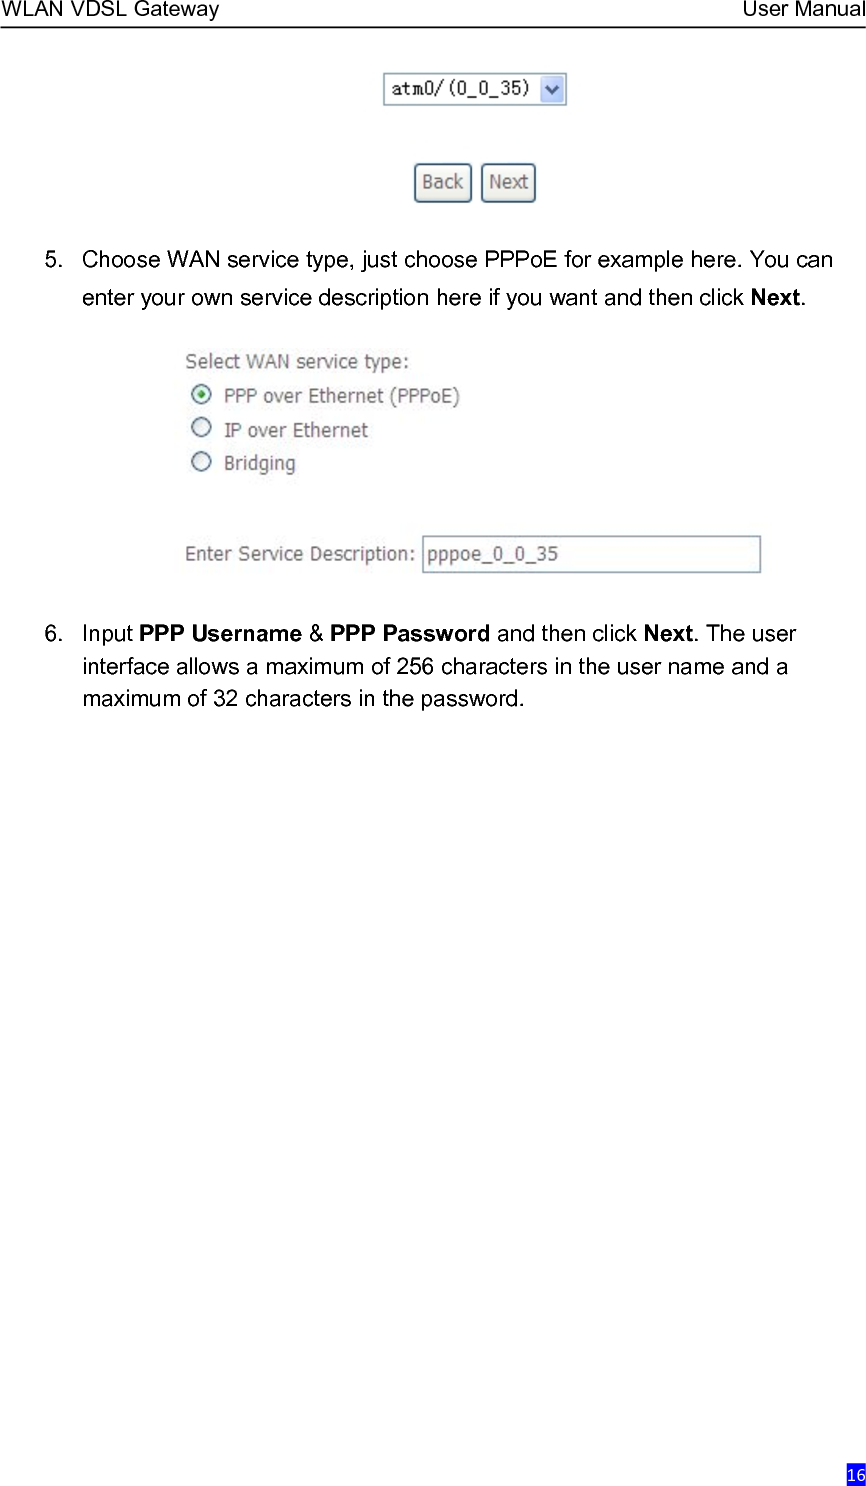 WLAN VDSL Gateway User Manual165. Choose WAN service type, just choose PPPoE for example here. You canenter your own service description here if you want and then click Next.6. Input PPP Username &amp;PPP Password and then click Next. The userinterface allows a maximum of 256 characters in the user name and amaximum of 32 characters in the password.